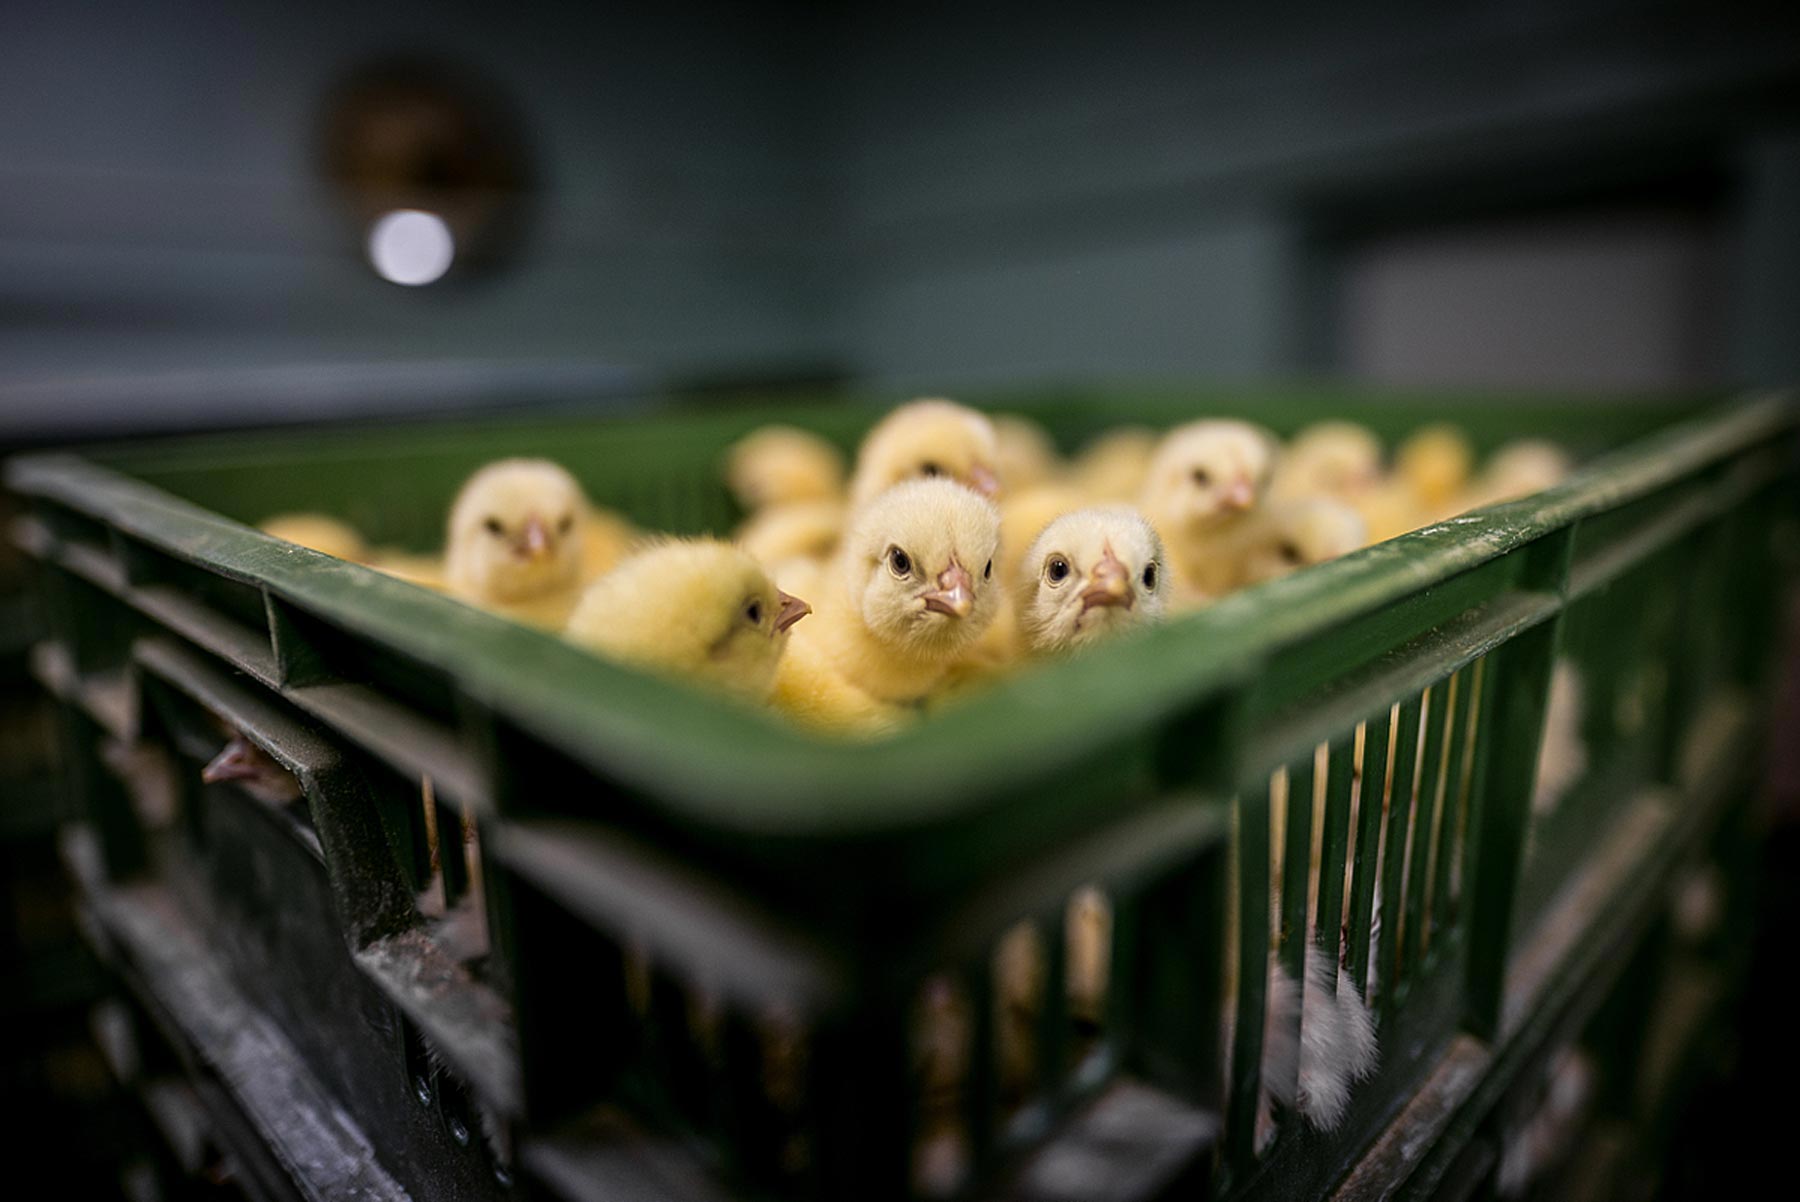 Day-old chicks are packed into crates at an industrial hatchery